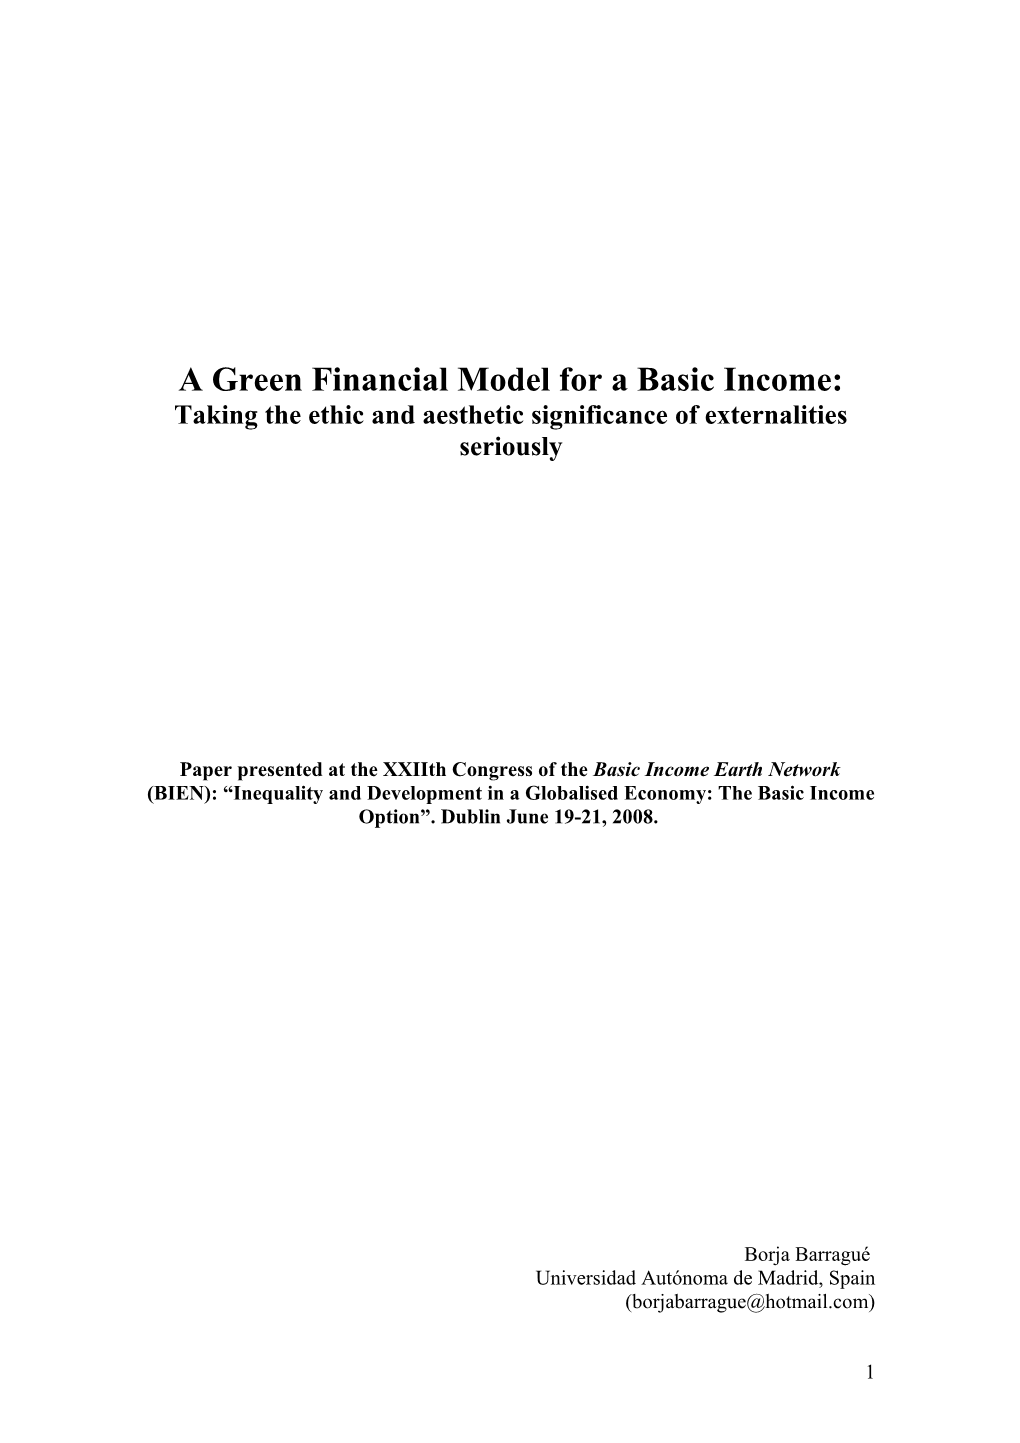 A Green Financial Model for a Basic Income